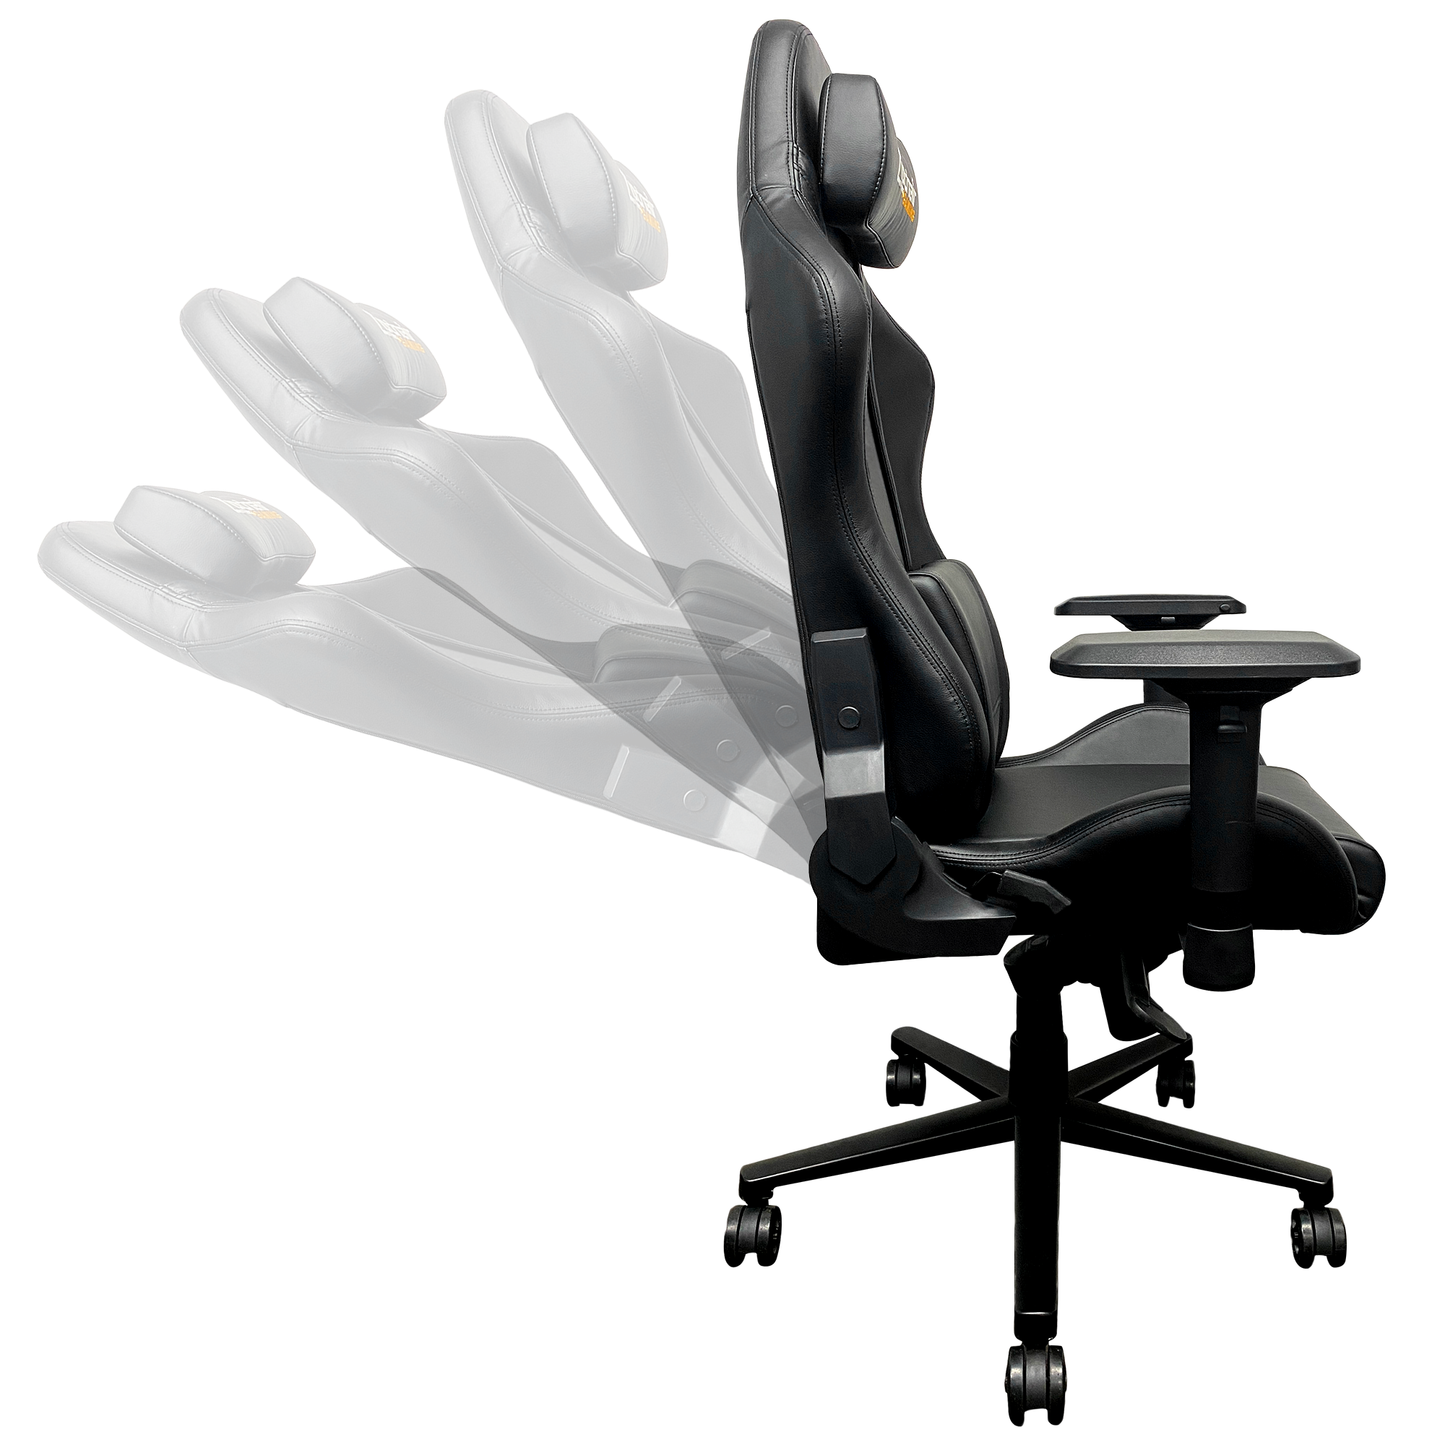 Xpression Pro Gaming Chair with Chevy Racing logo